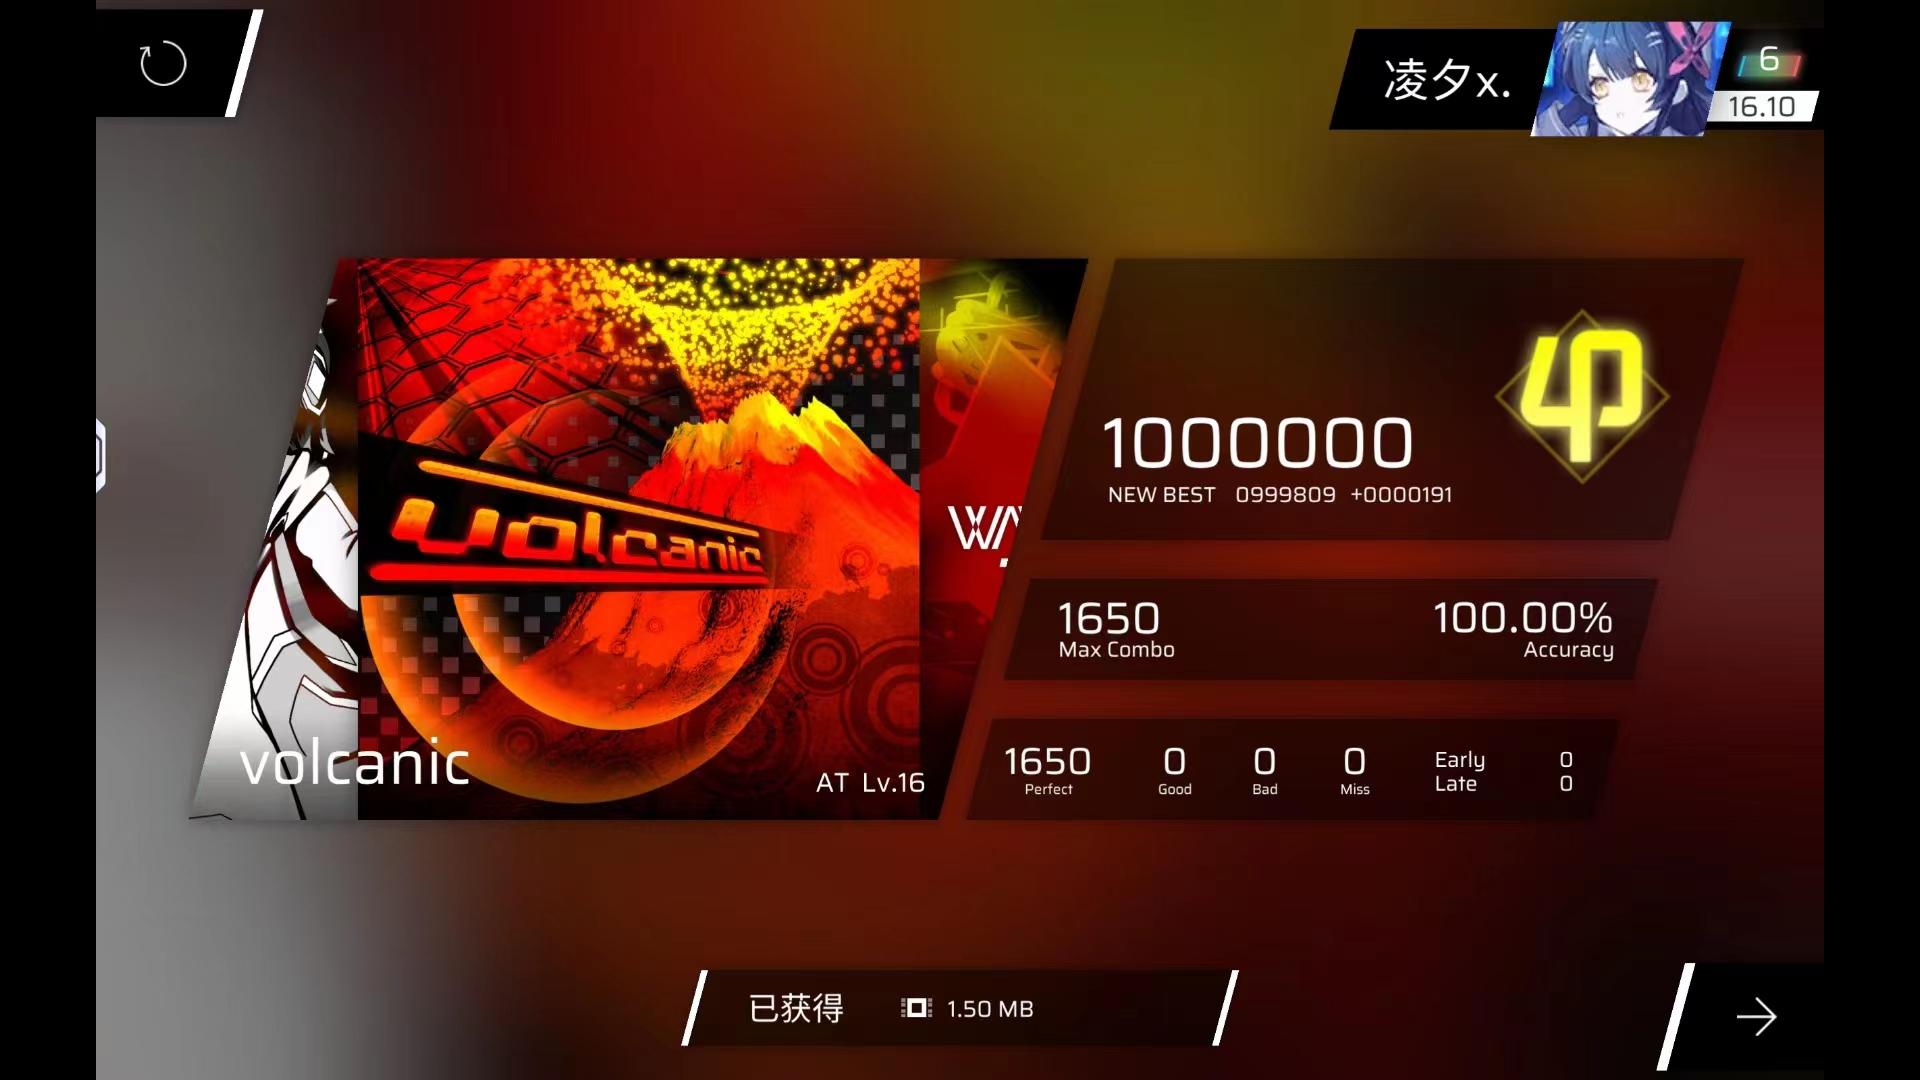 【Phigros手元】火山 volcanic AT Lv.16 ALL PERFECT